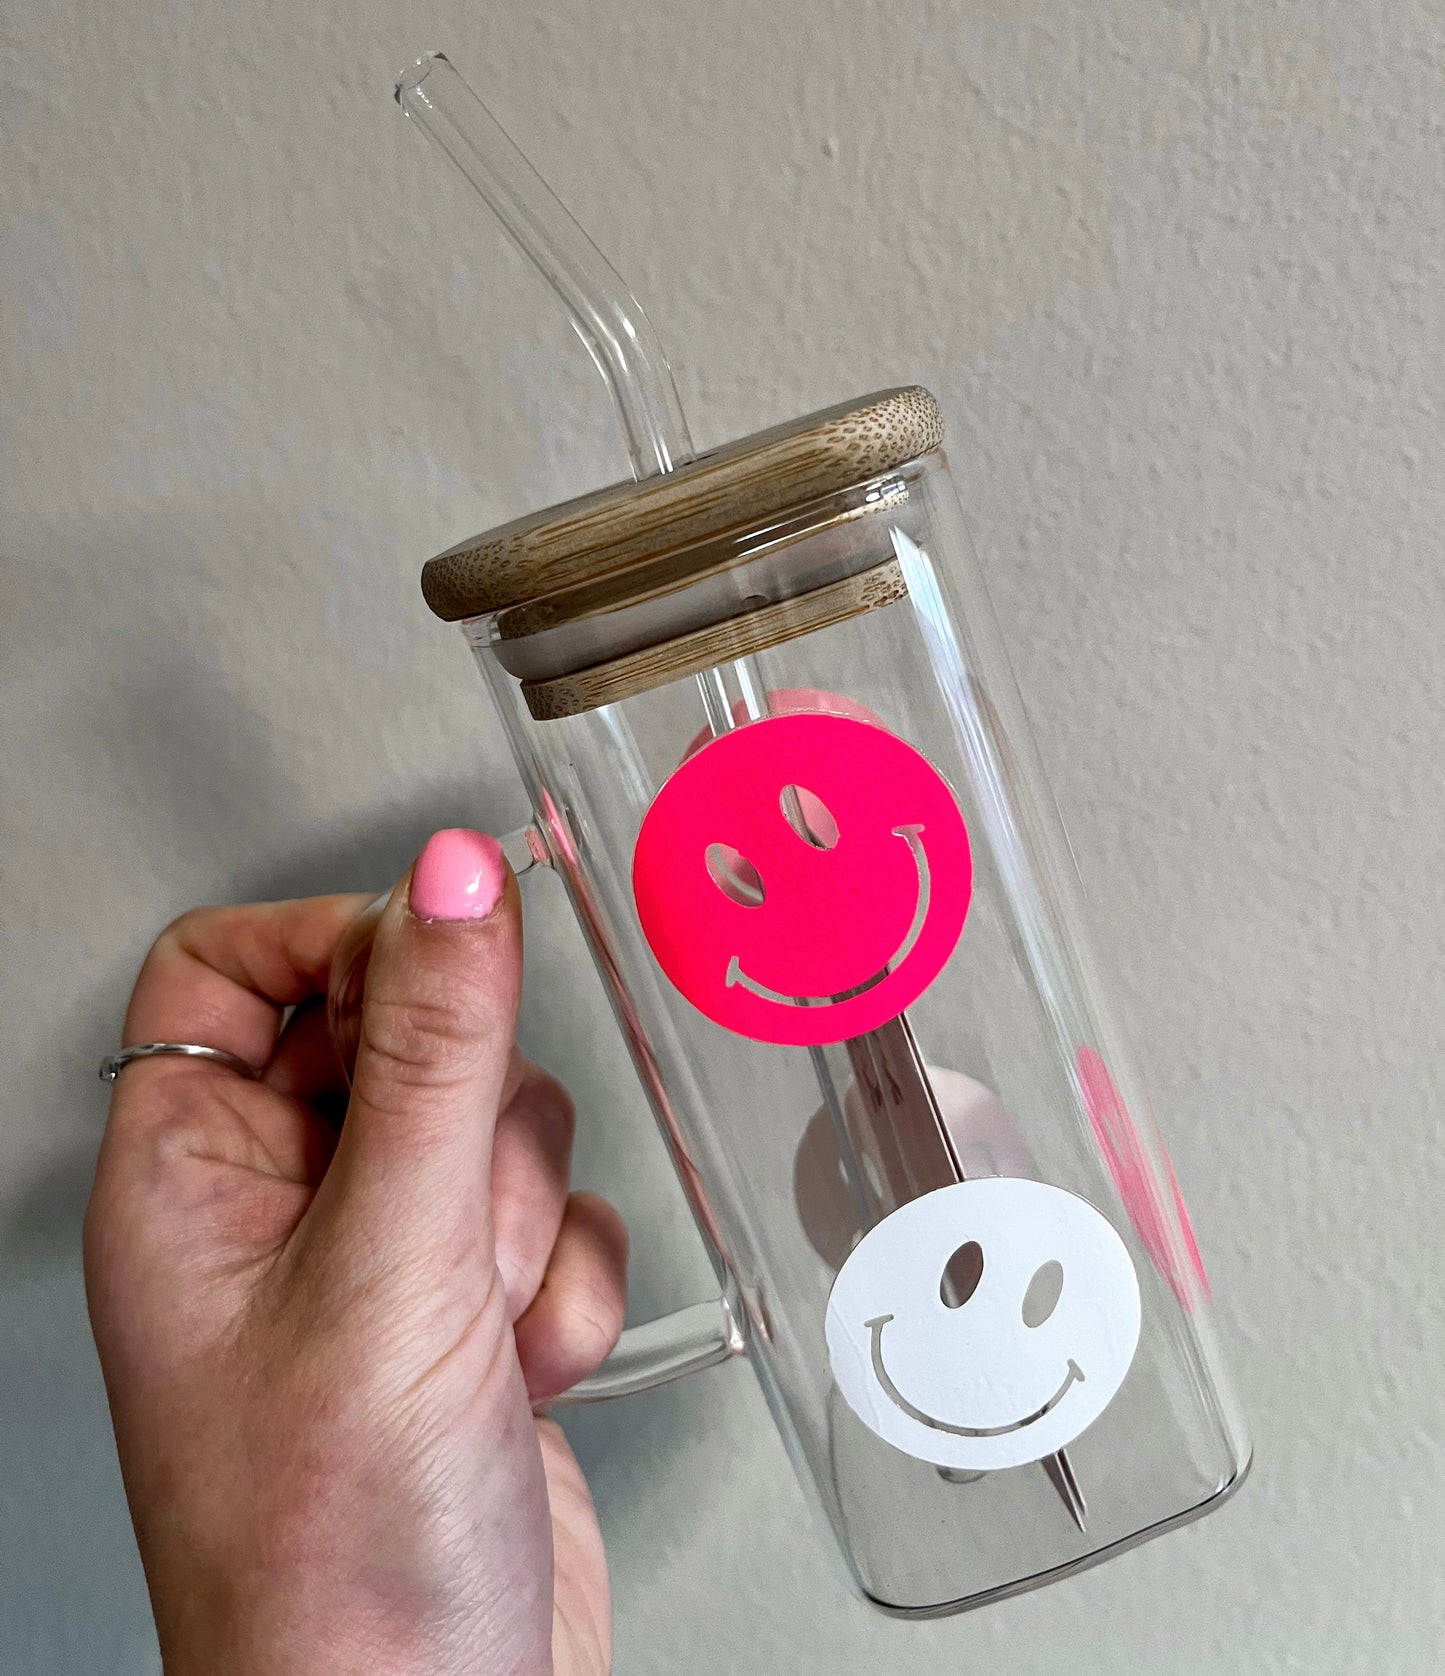 12.5oz Smiley Face Glass Cup